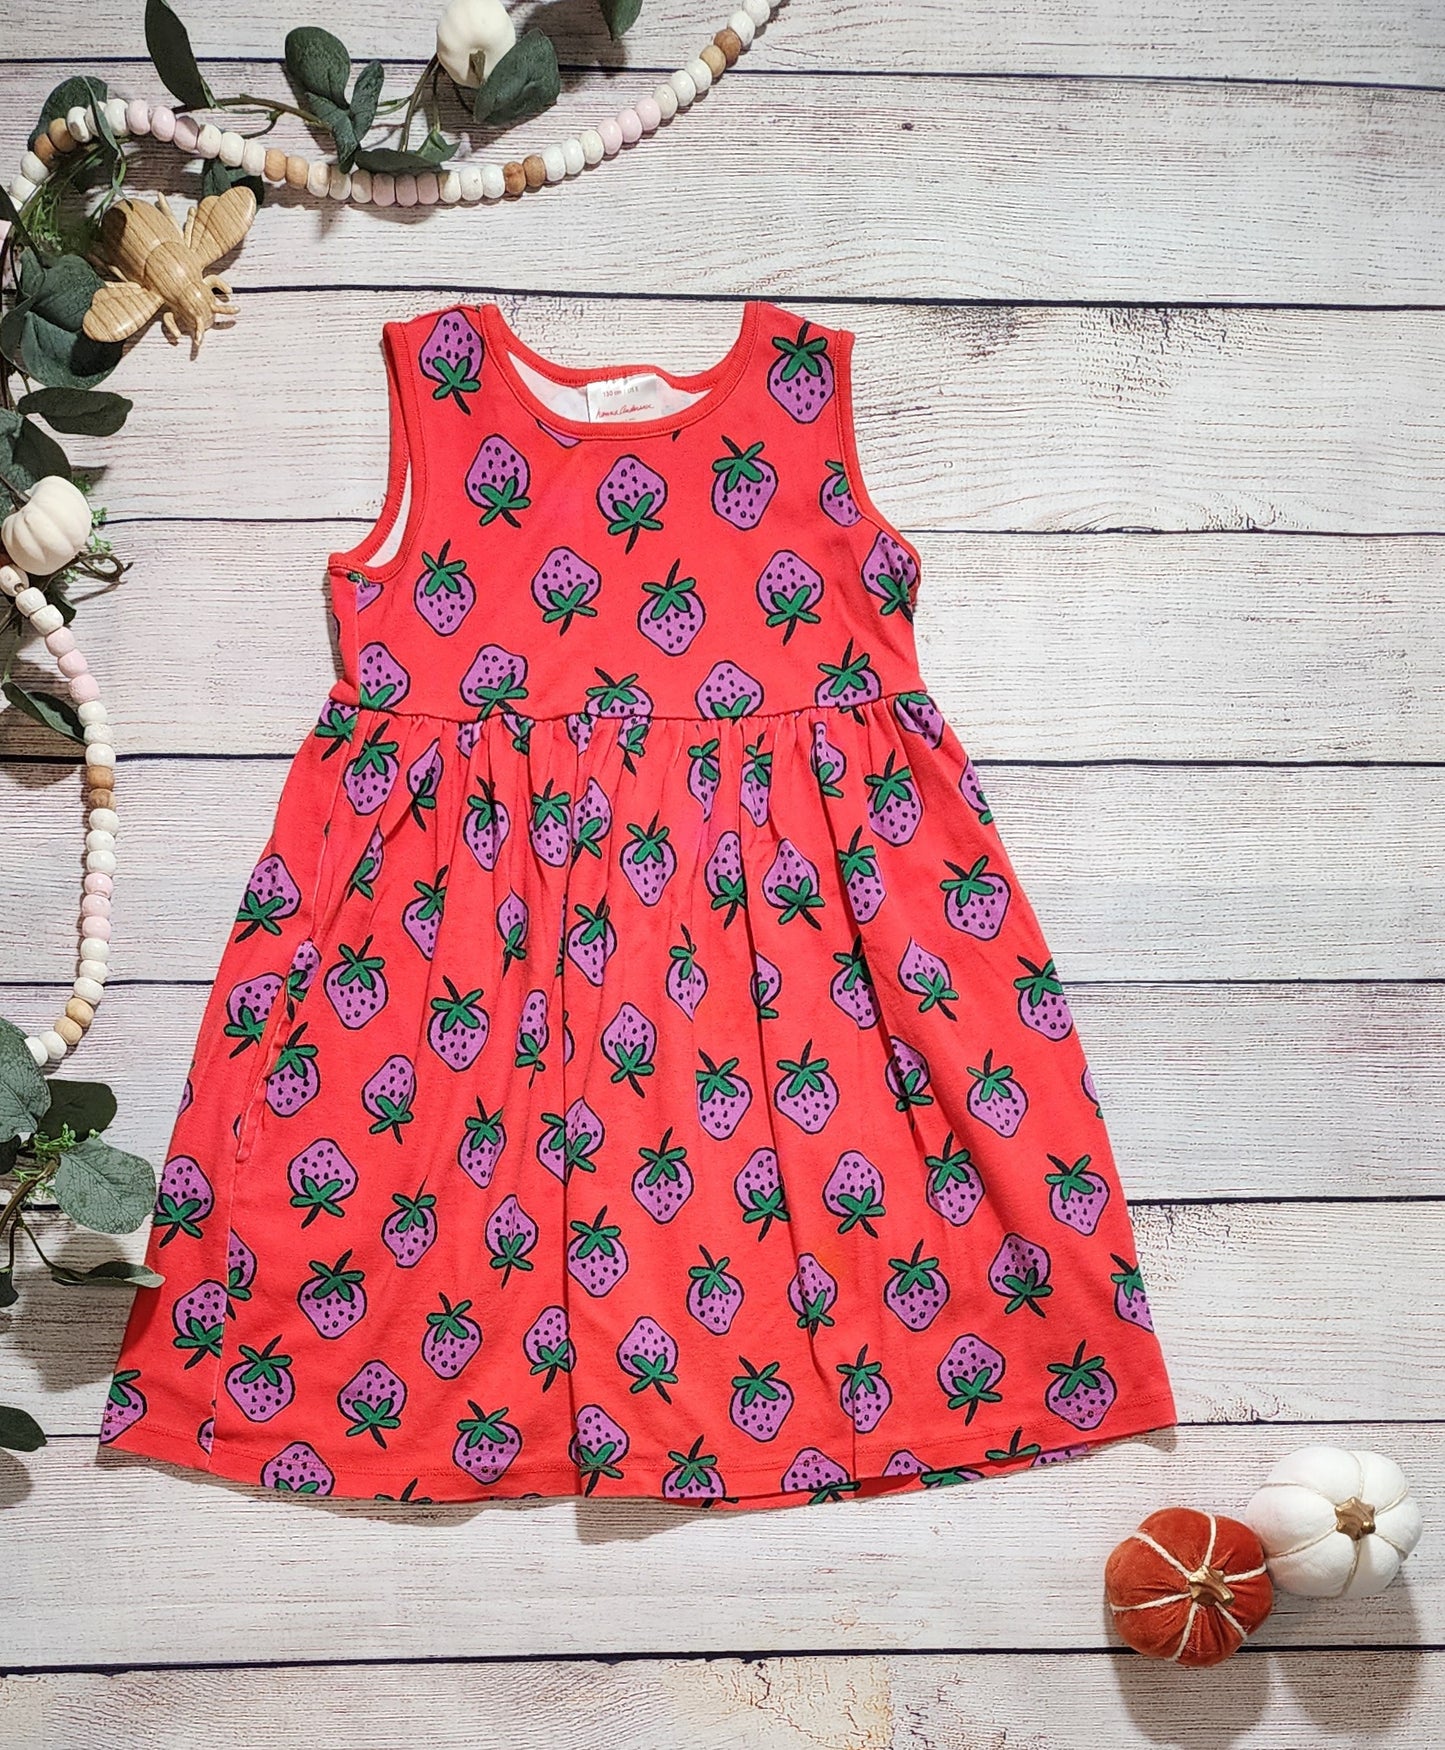 Hanna Andersson Strawberry Dress, Size 8 / 130cm